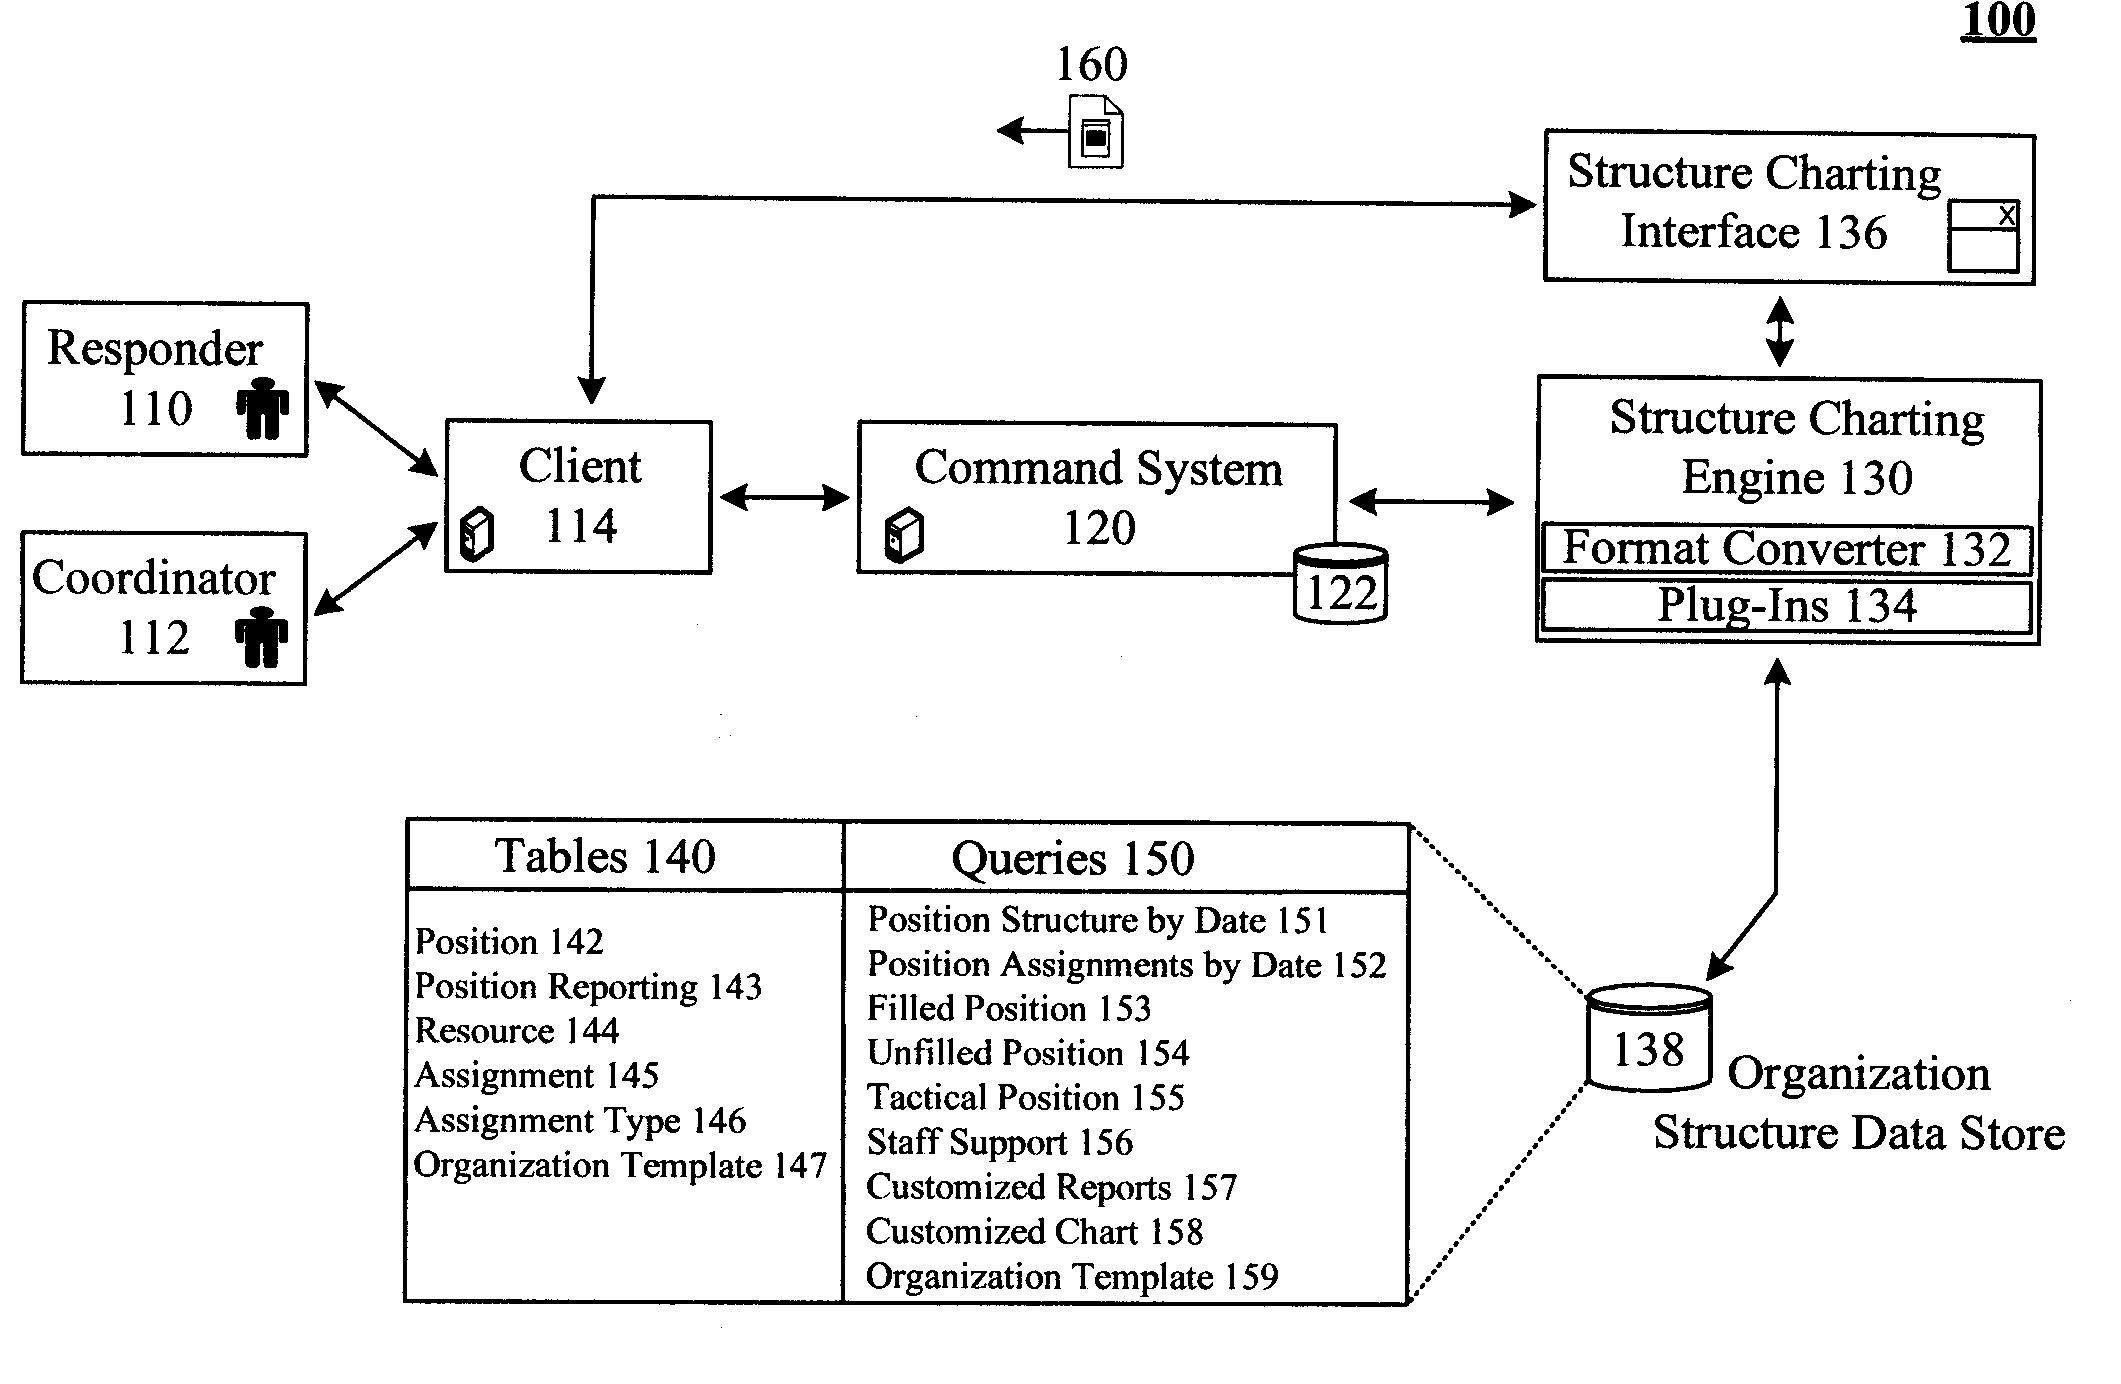 Storing and depicting organizations that are subject to dynamic event driven restructuring